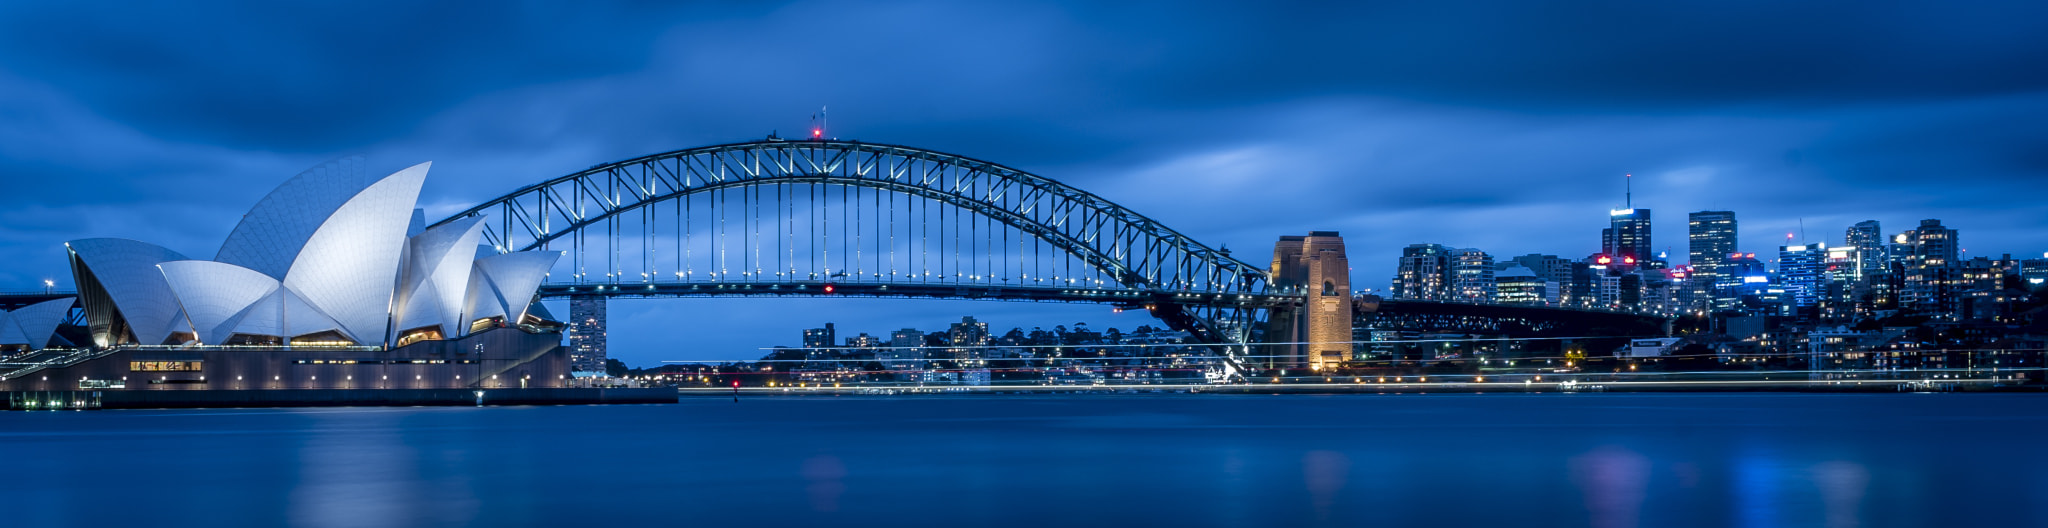 Nikon D810 + Nikon AF-S DX Nikkor 18-140mm F3.5-5.6G ED VR sample photo. Sydney harbour bridge and opera house with the manly ferry going through the image. photography